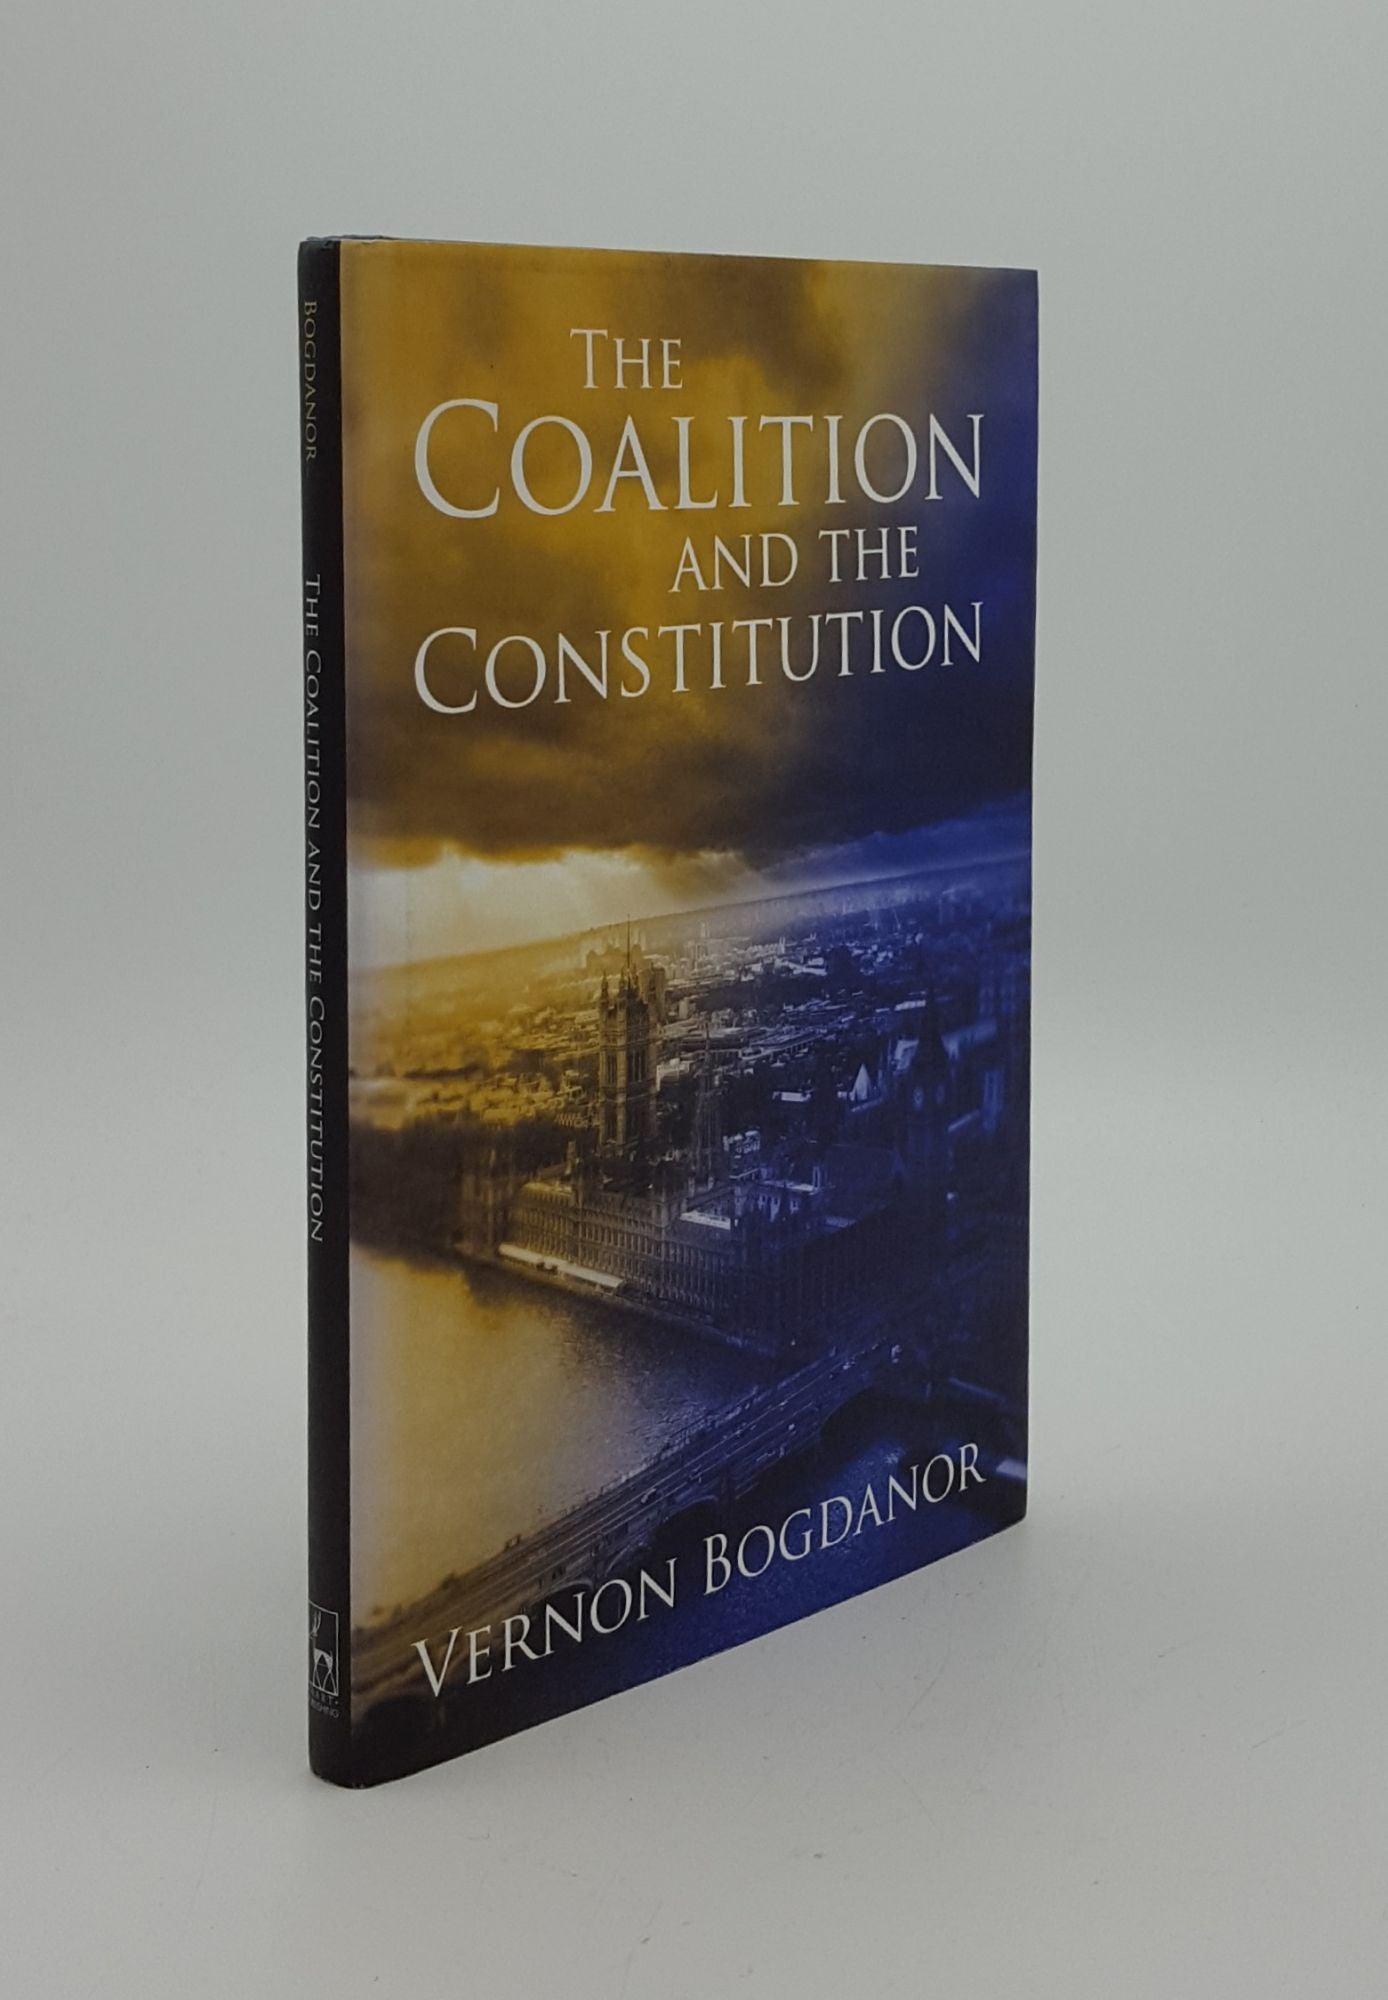 BOGDANOR Vernon - The Coalition and the Constitution